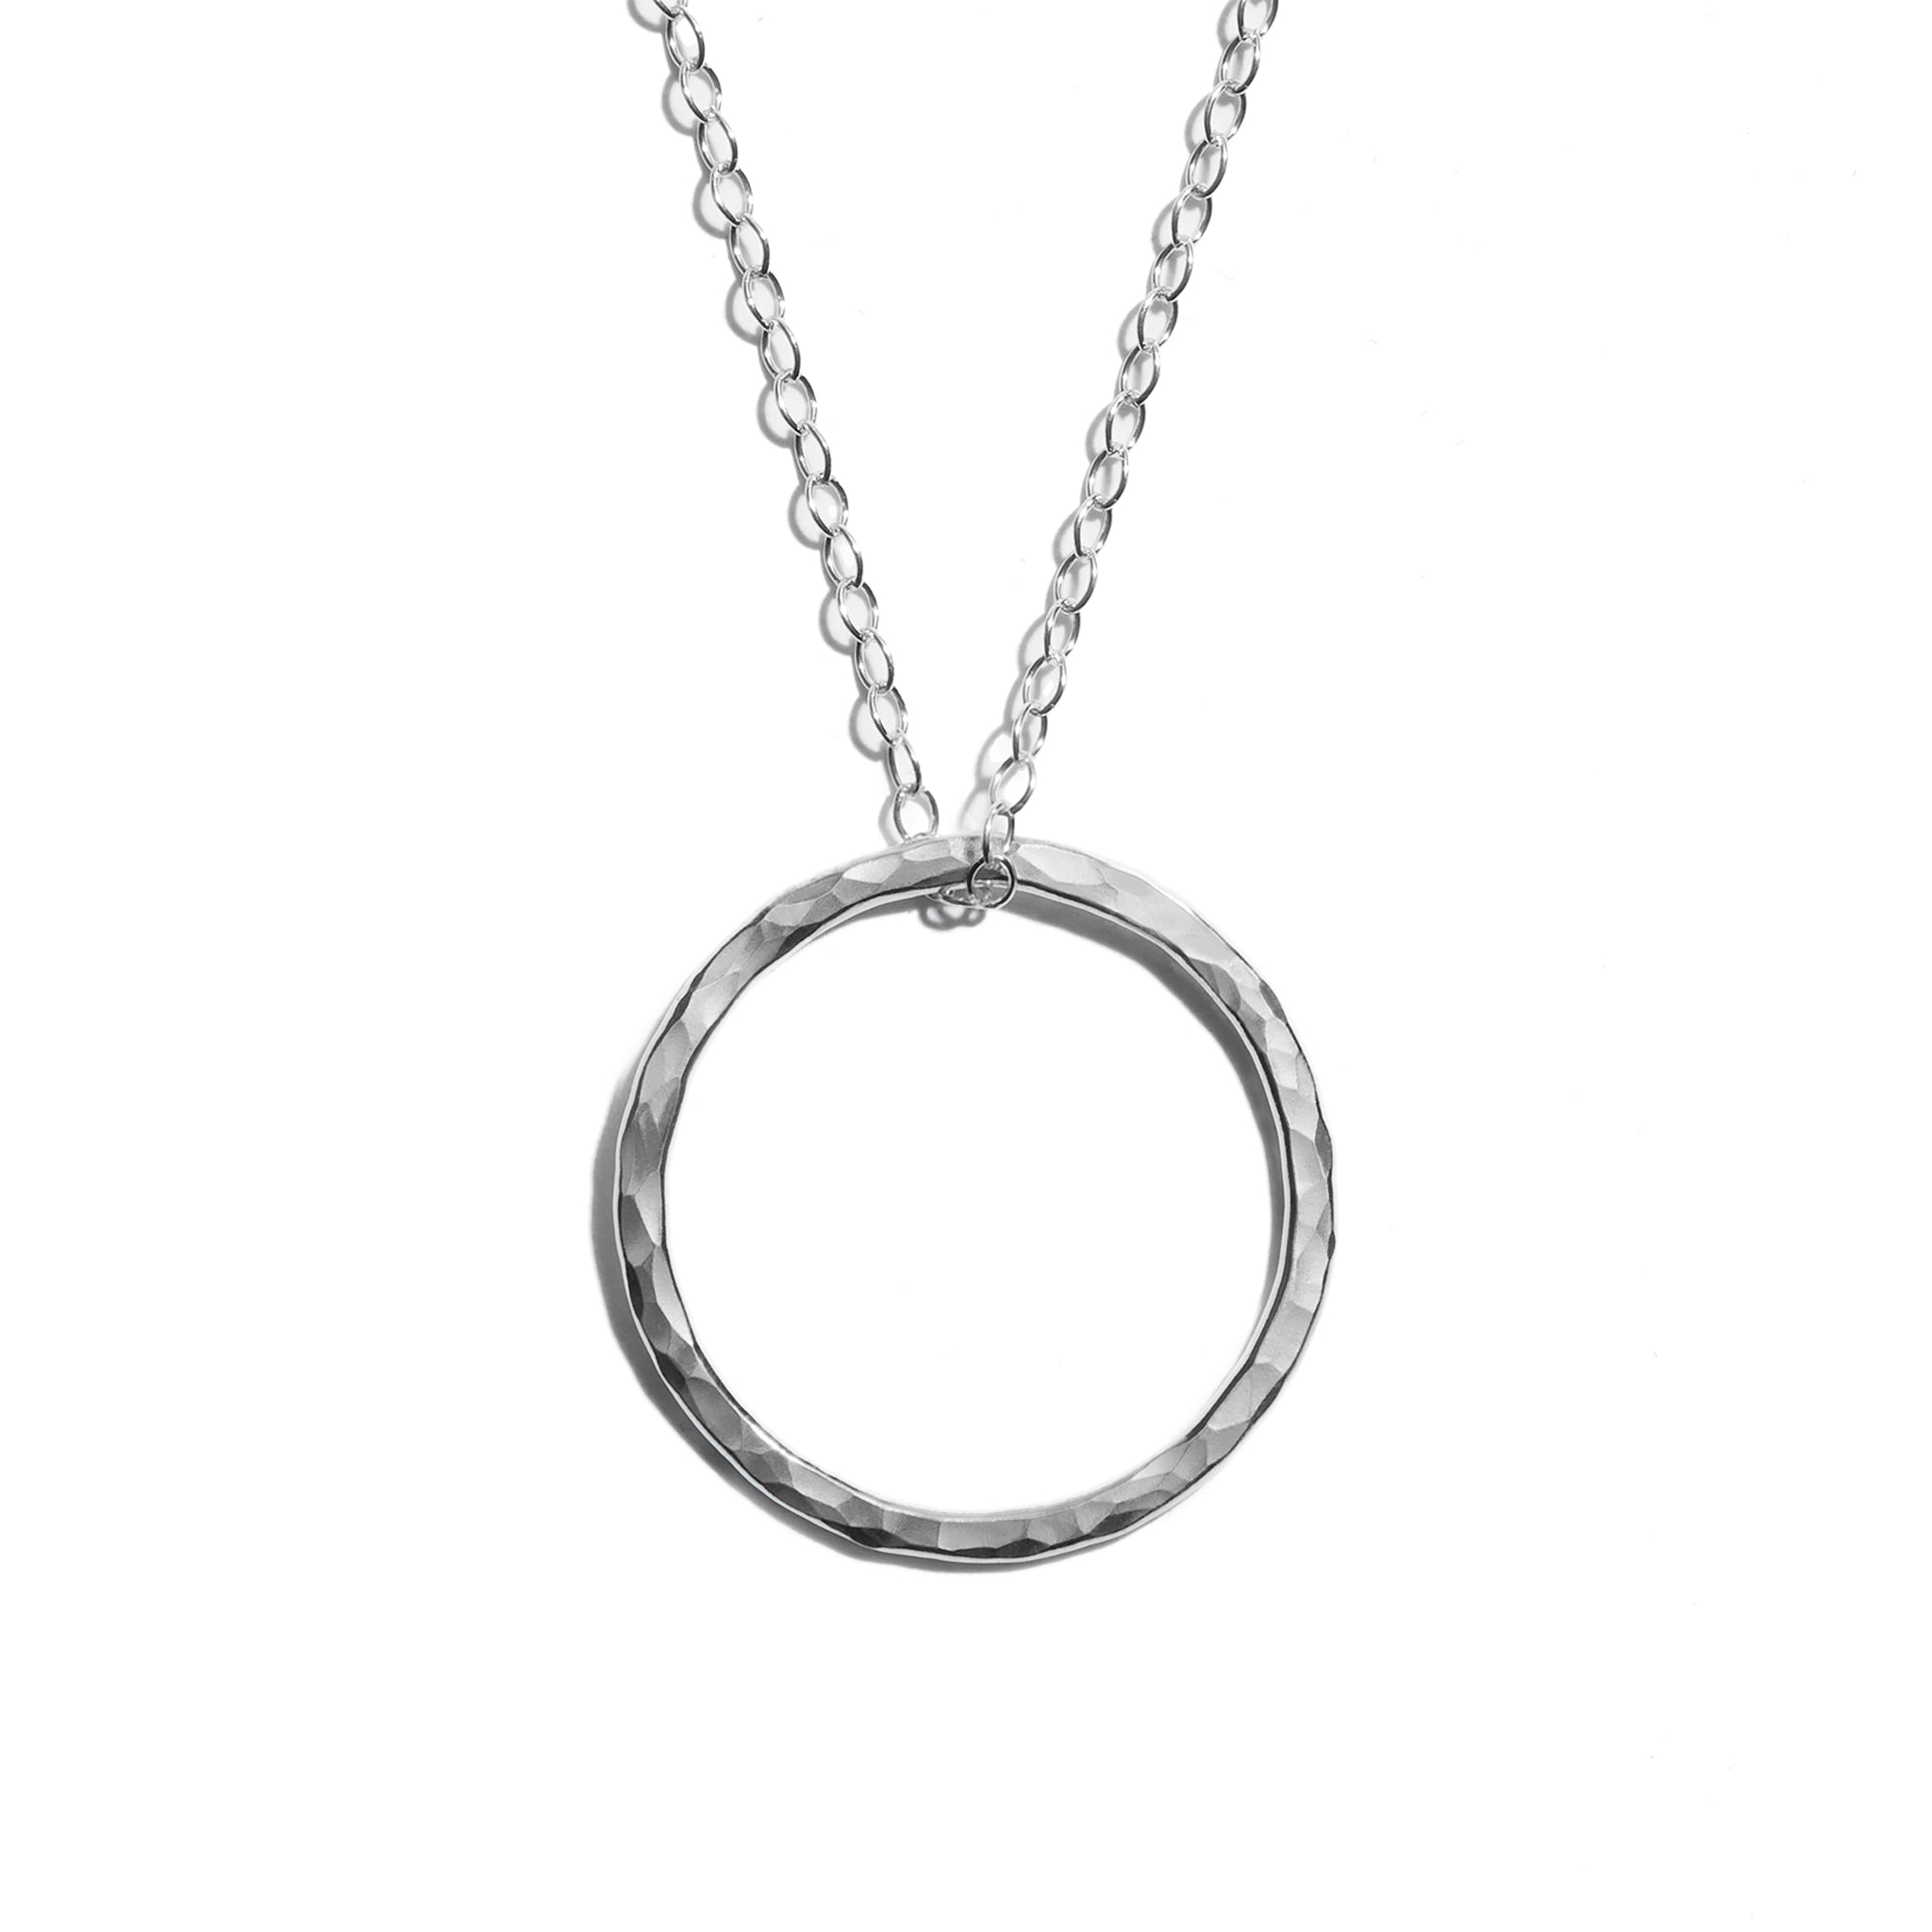 Photo of a luxurious silver medium open circle pendant. Perfect for adding elegance to any outfit.